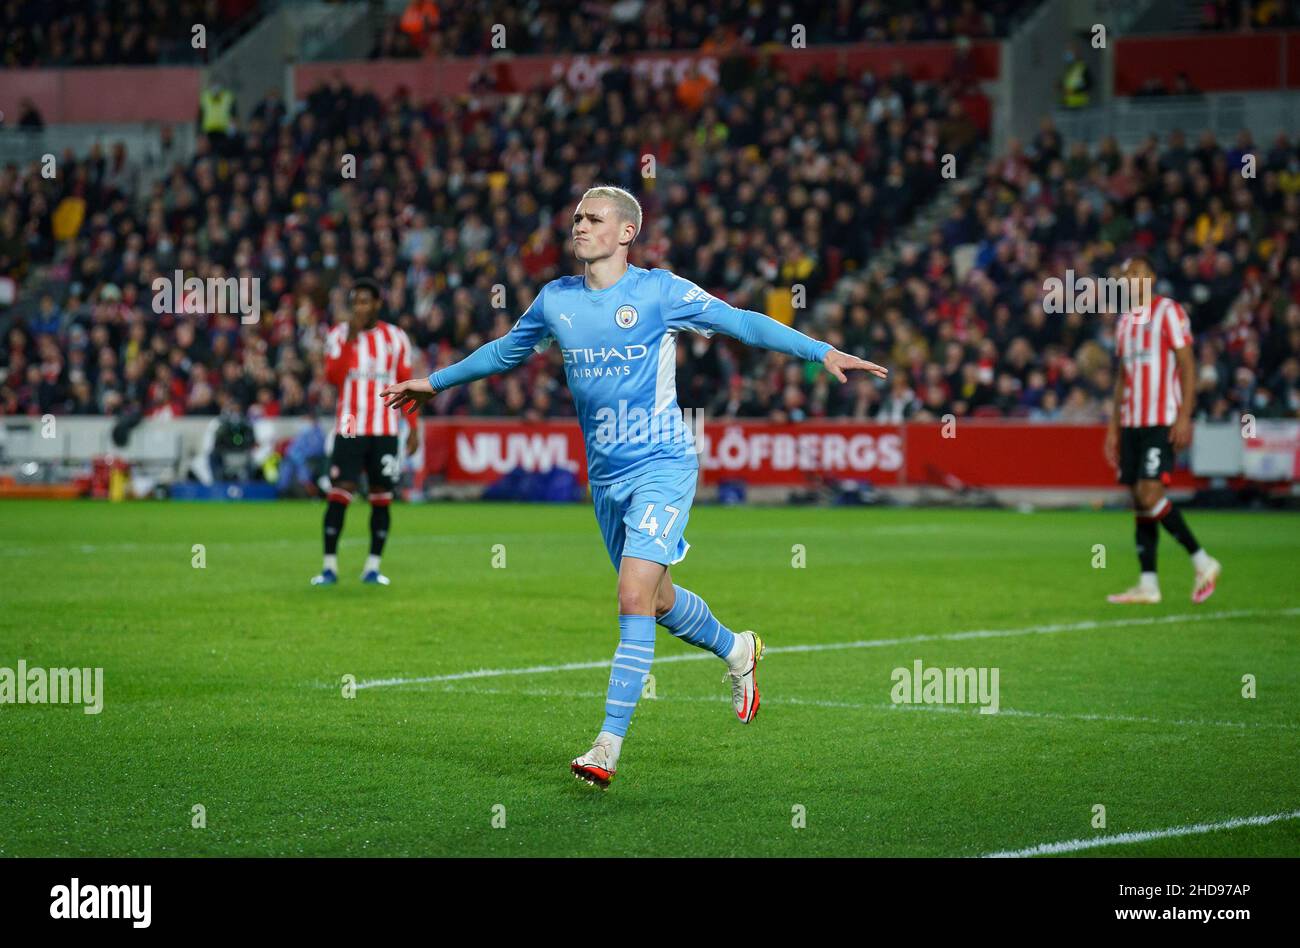 Brentford, UK. 29th Dec, 2021. Phil Foden of Man City celebrates scoring the winning goal during the Premier League match between Brentford and Manchester City at the Brentford Community Stadium, Brentford, England on 29 December 2021. Photo by Andy Rowland. Credit: PRiME Media Images/Alamy Live News Stock Photo